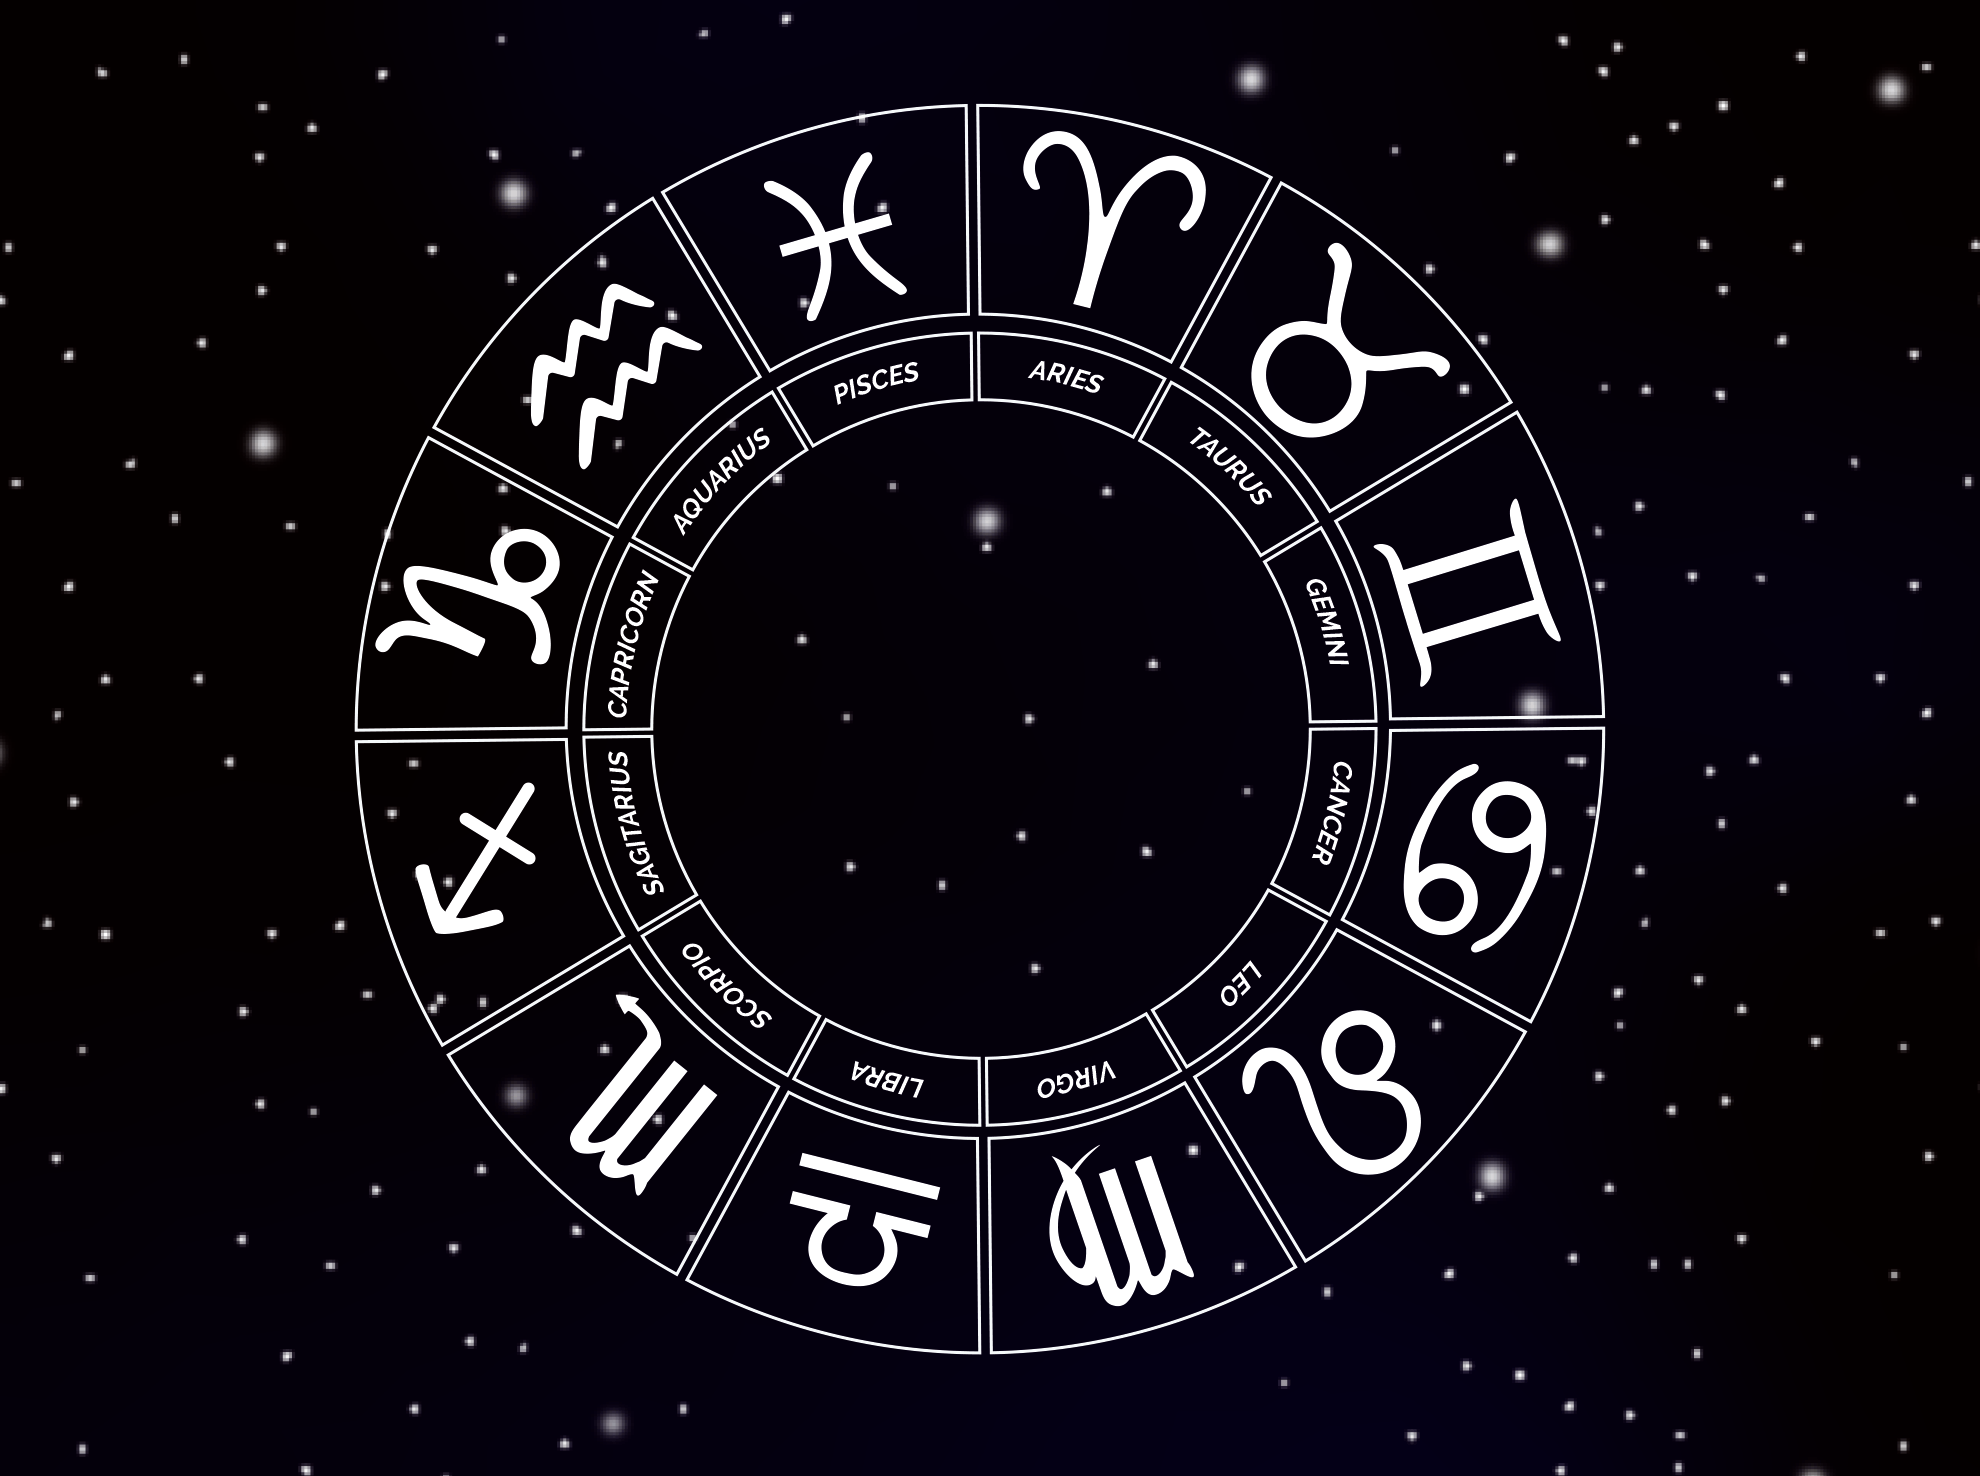 Signos zodiacales occidentales